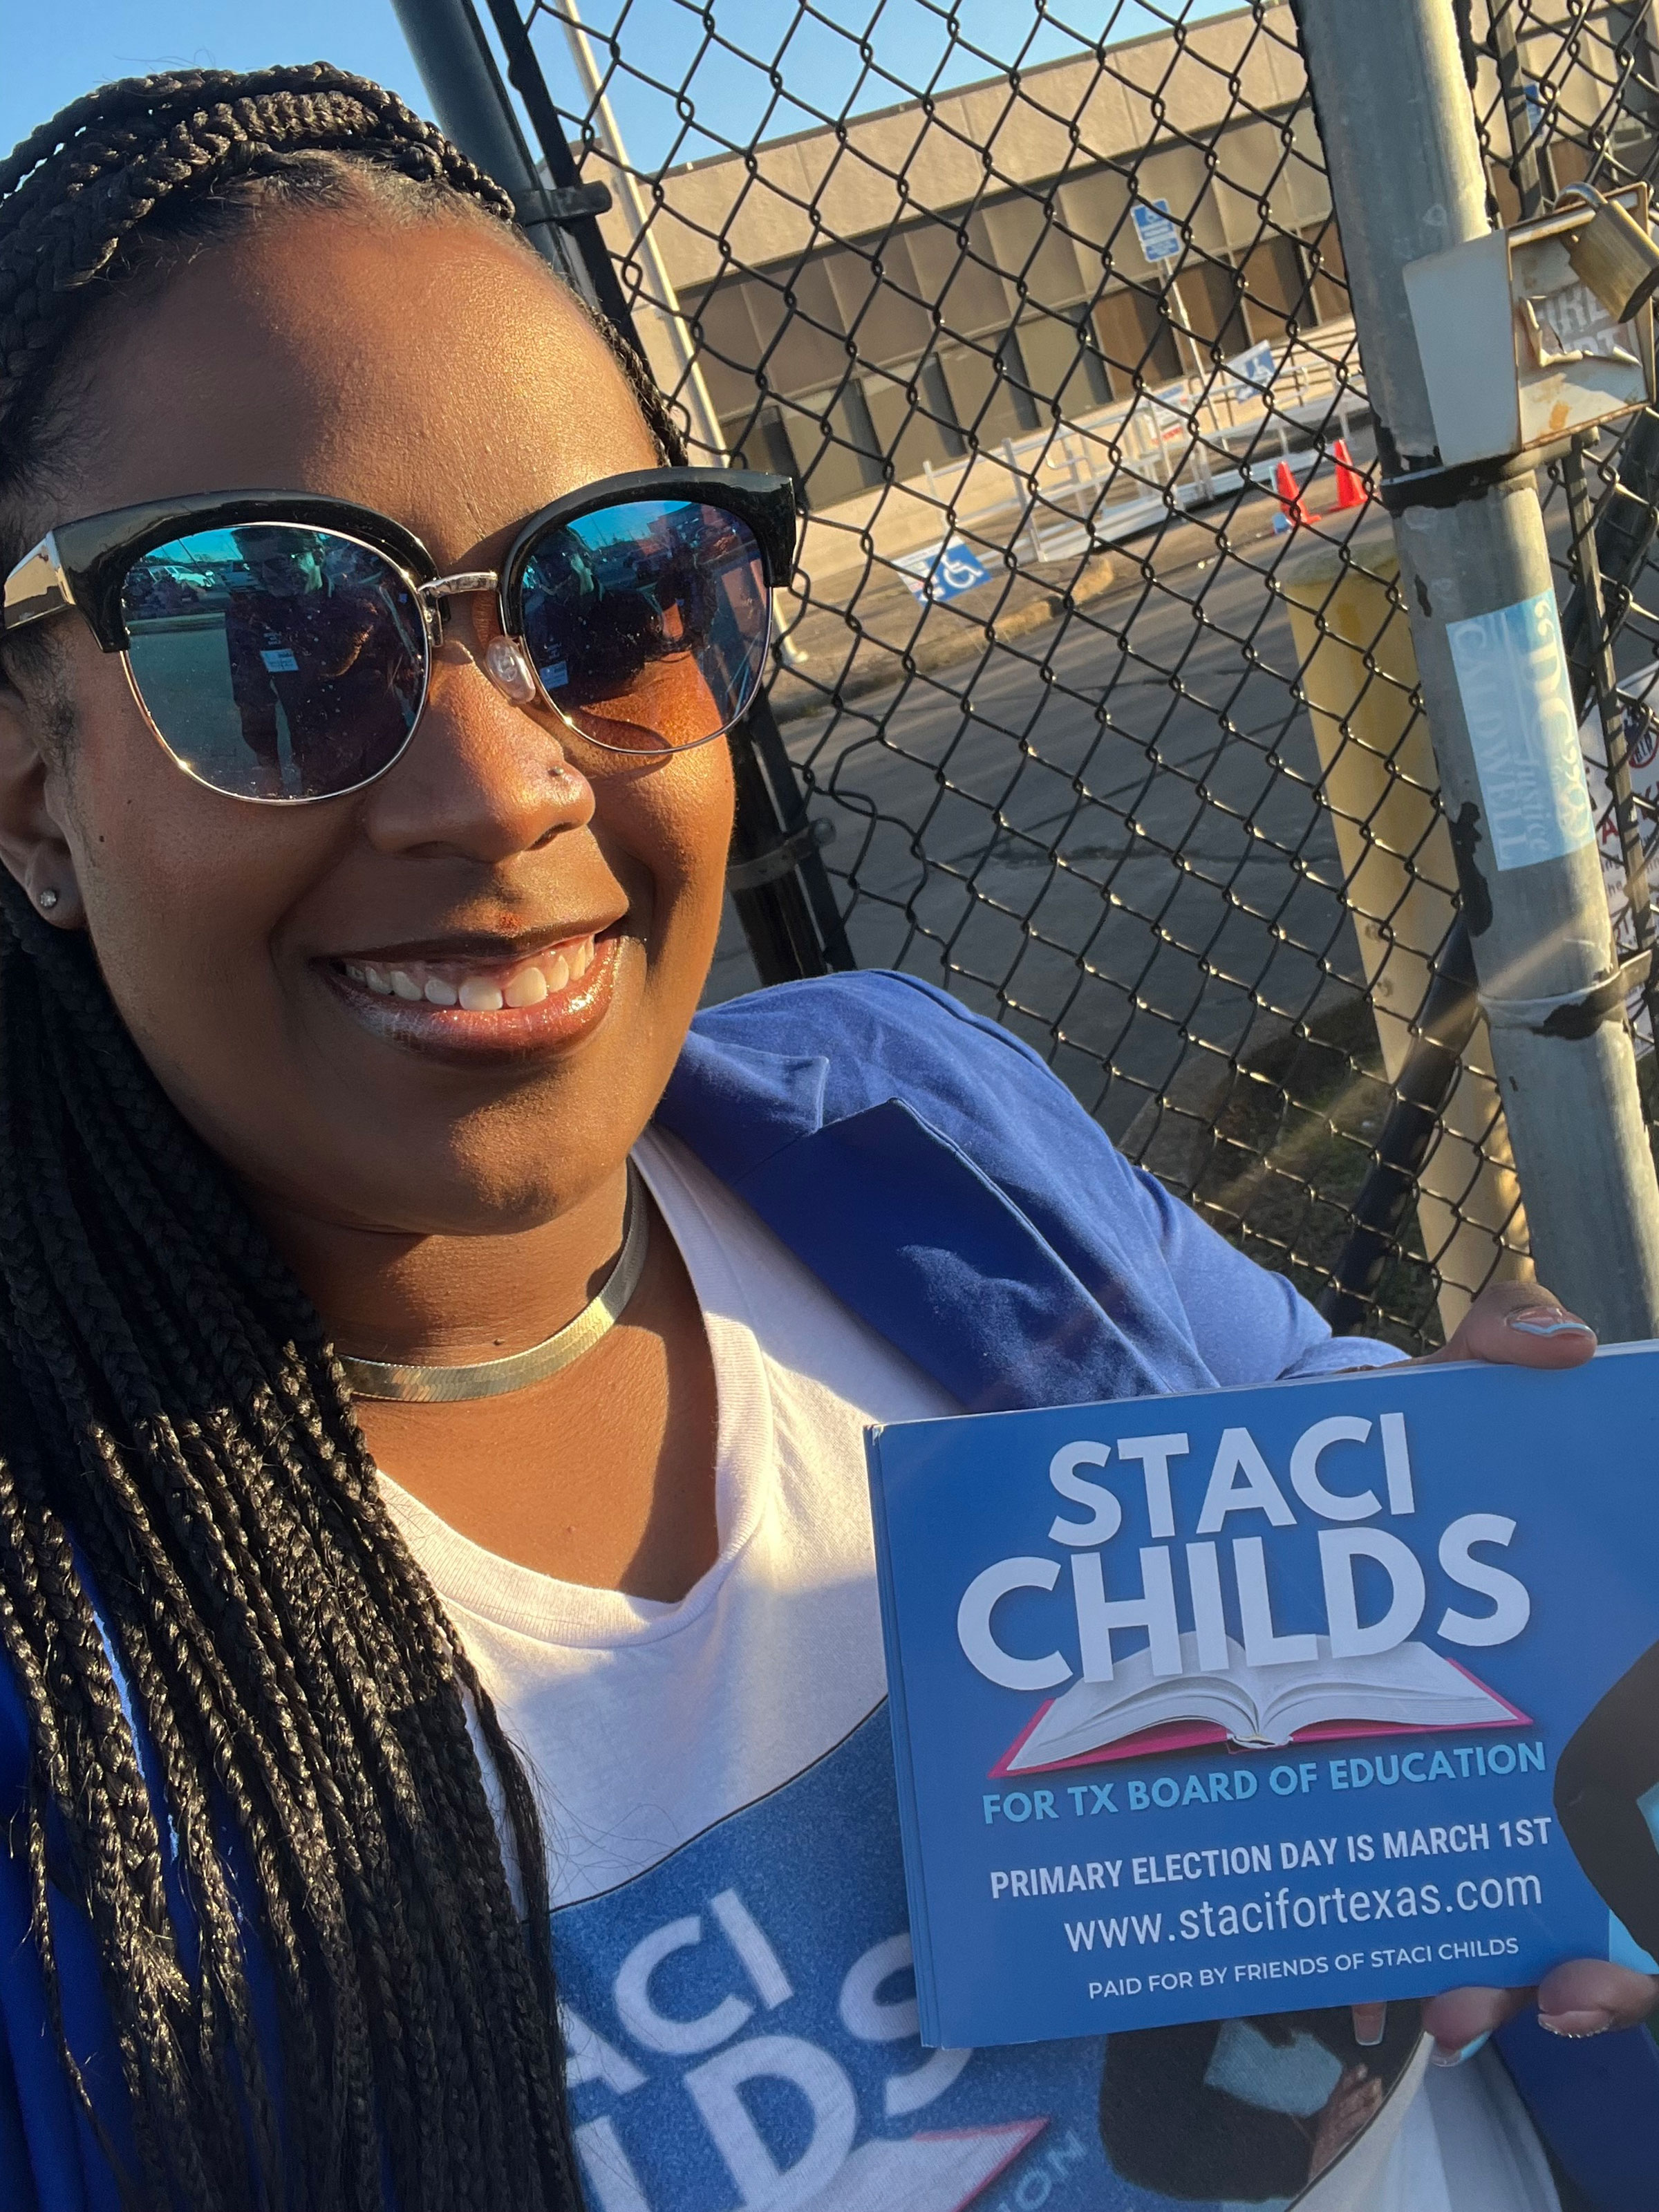 Staci Childs decided to run for the Texas State Board of Education after growing frustrated by the rhetoric over critical race theory in the state. (Courtesy Staci Childs)